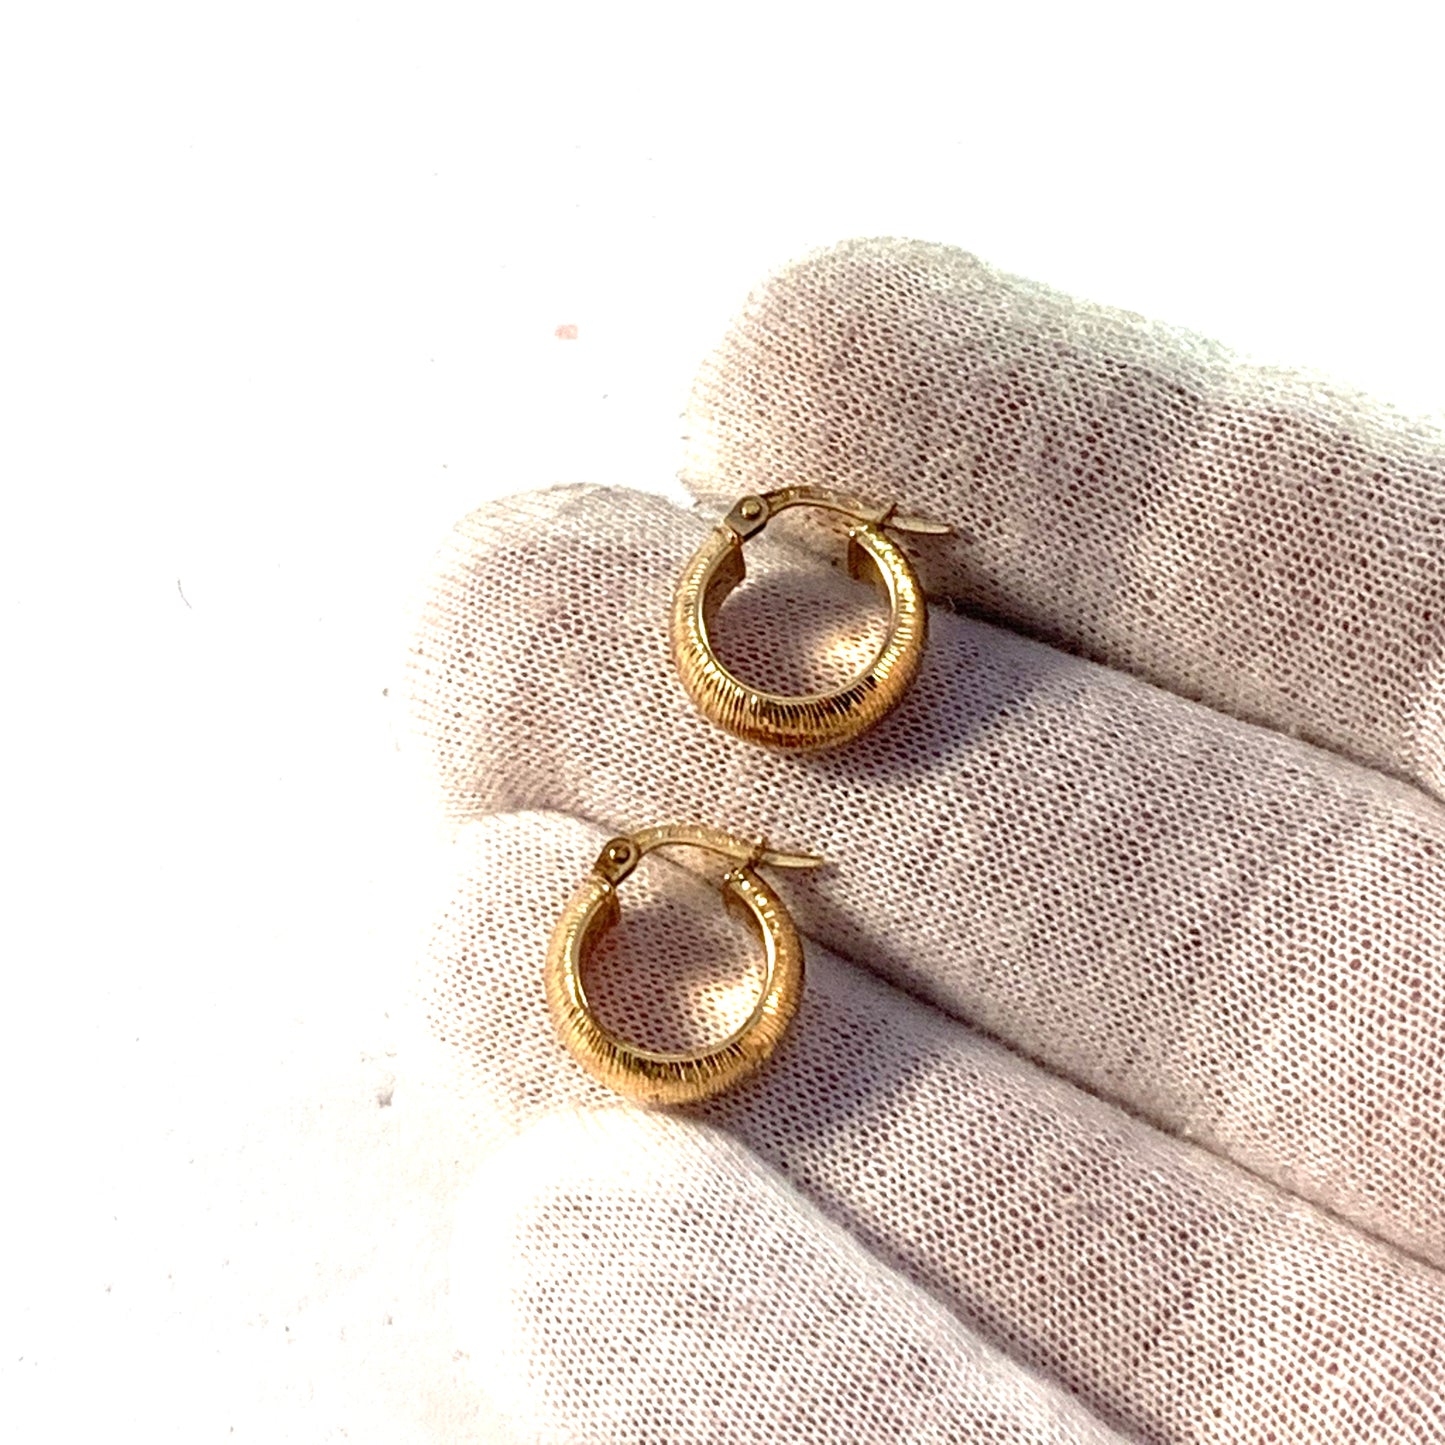 Uno A Erre, Italy. Vintage 18k Gold Earrings